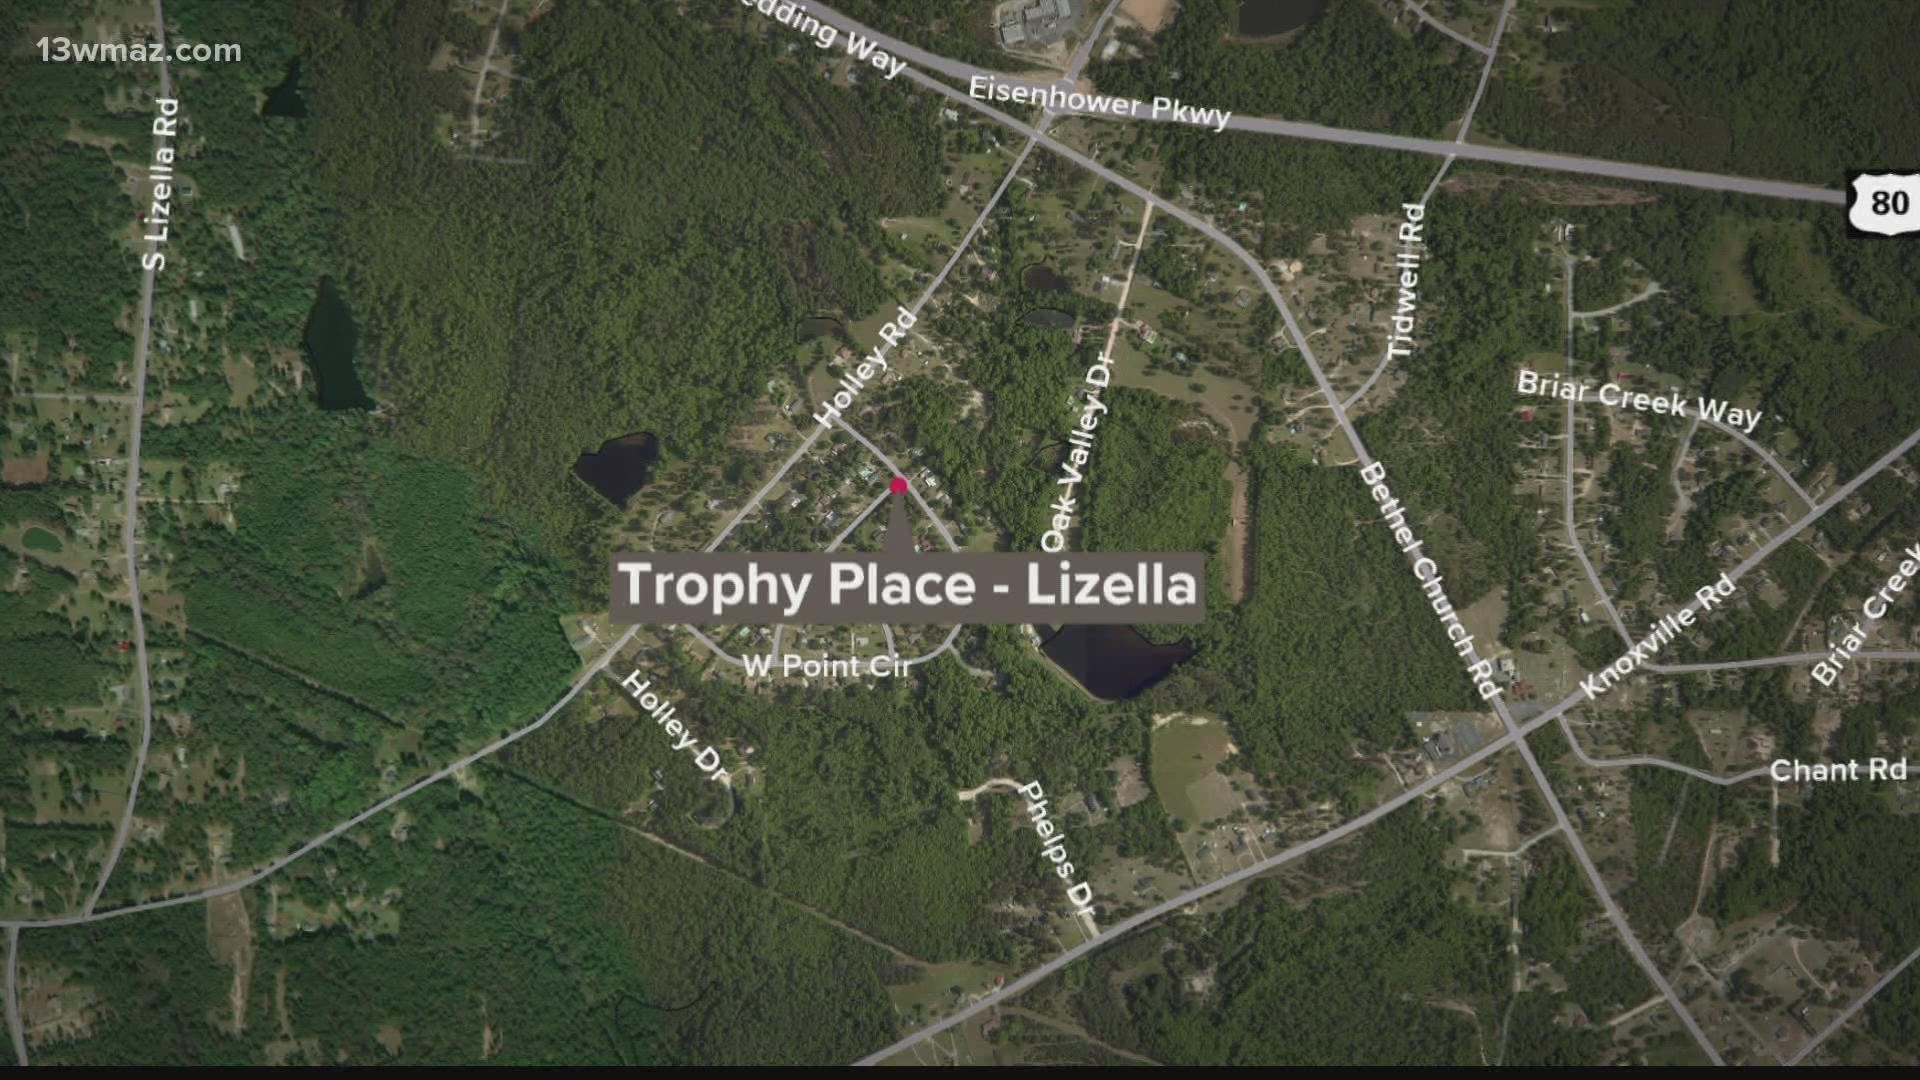 The 25-year-old attacker has been identified as Tyler McElhenny of Lizella.